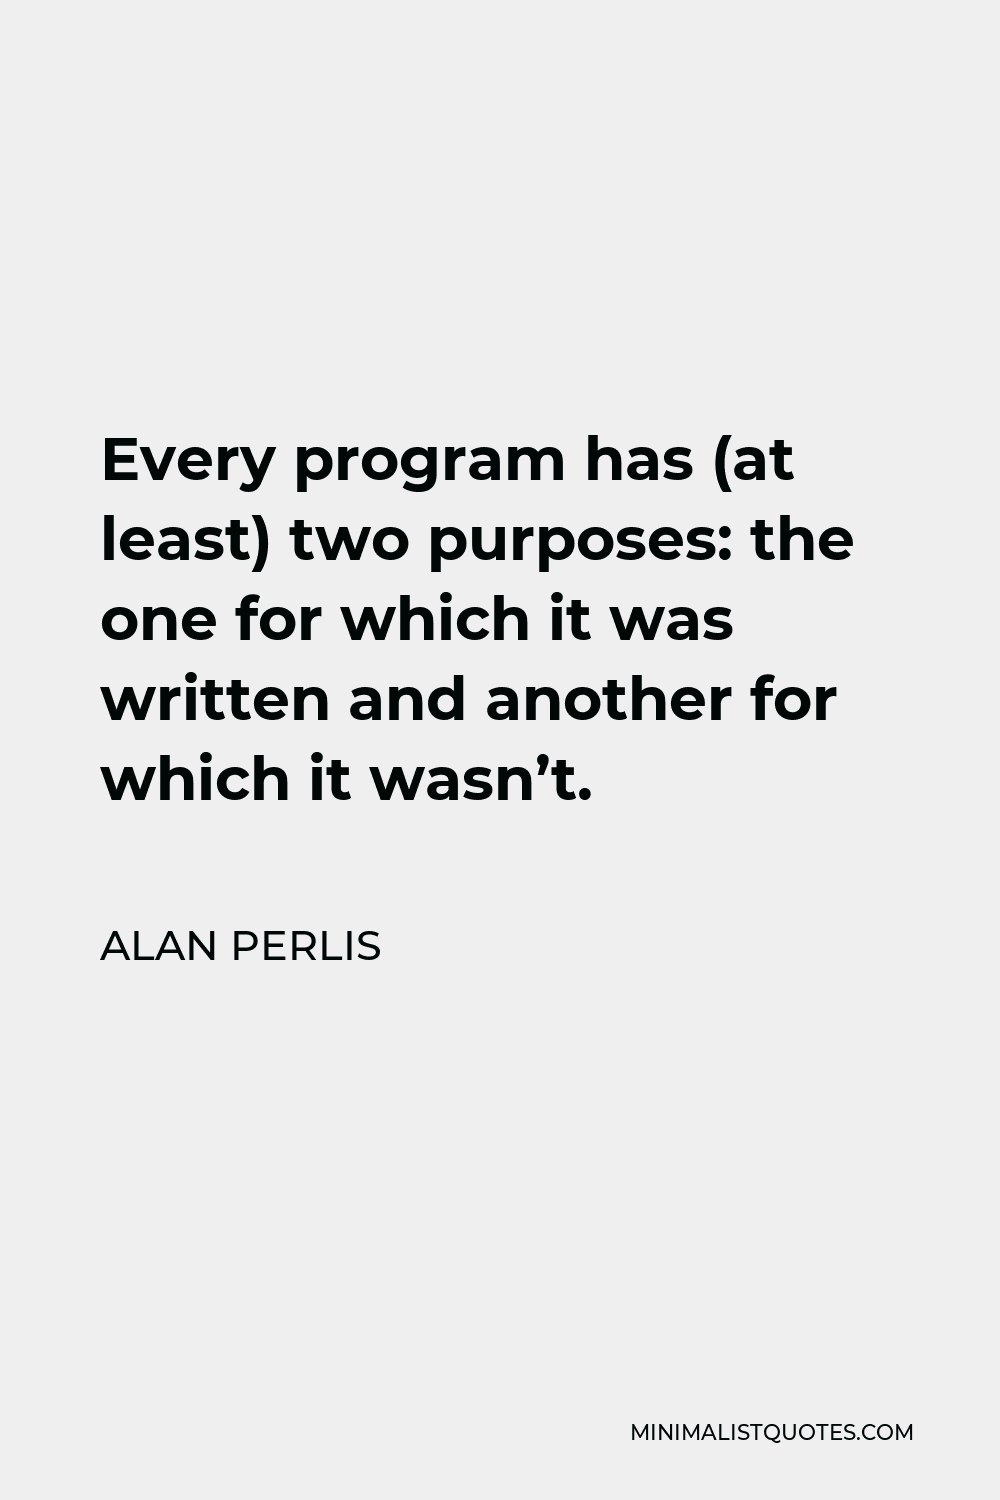 Alan Perlis Quote - Every program has (at least) two purposes: the one for which it was written and another for which it wasn’t.